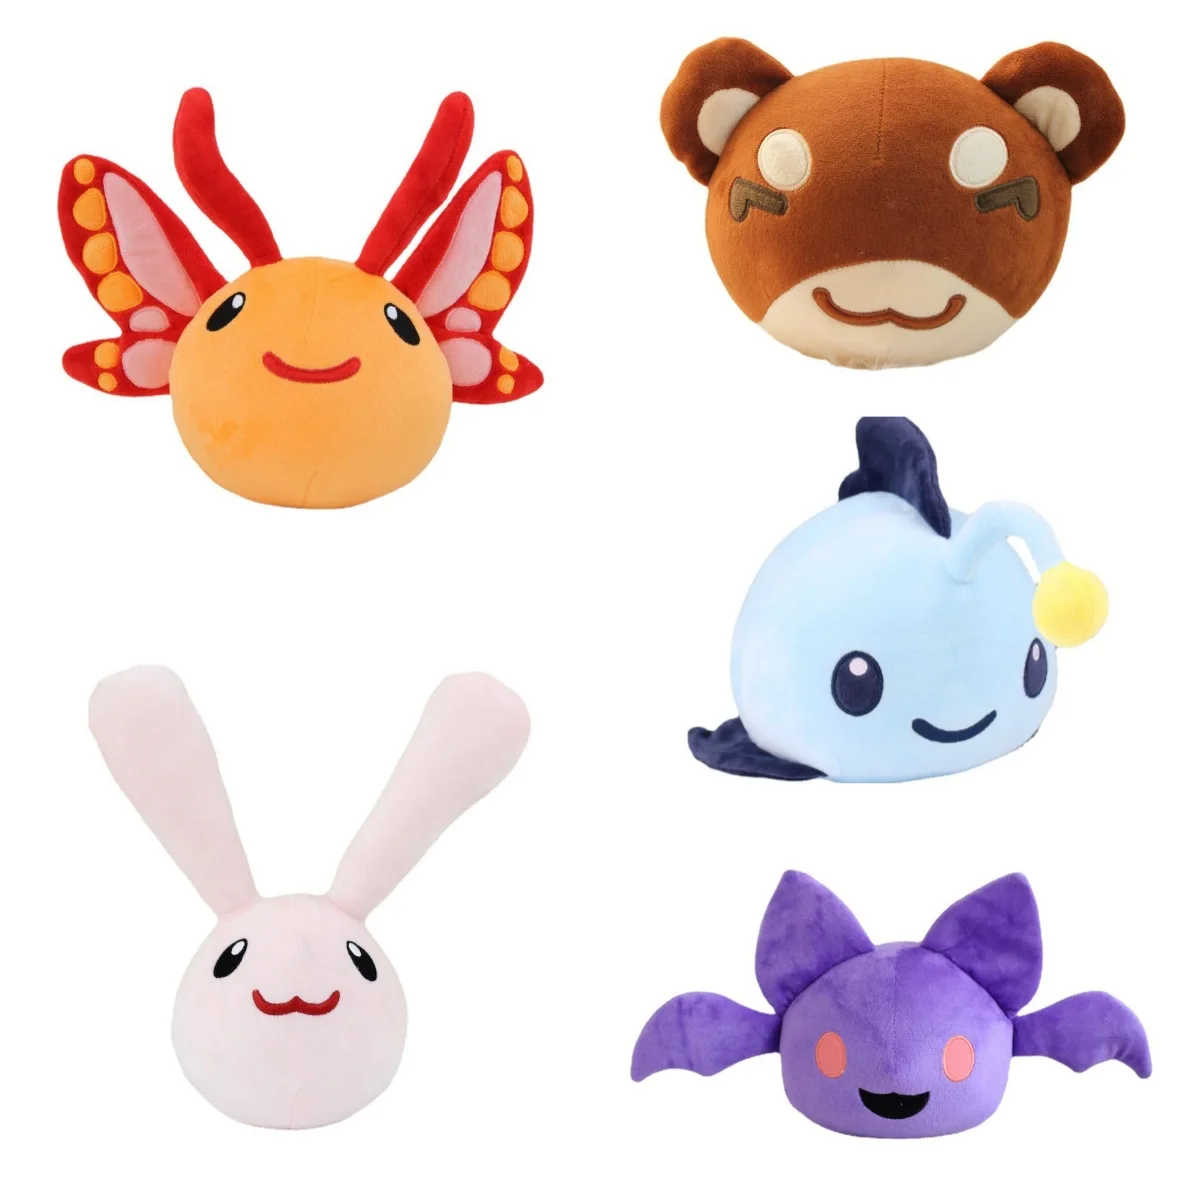 

20-40cm Cute Genshin Impact Slime Rancher Game Angler Batty Ringtail Flutter Cotton Slime Plush Soft Stuffed Gifts for Friends